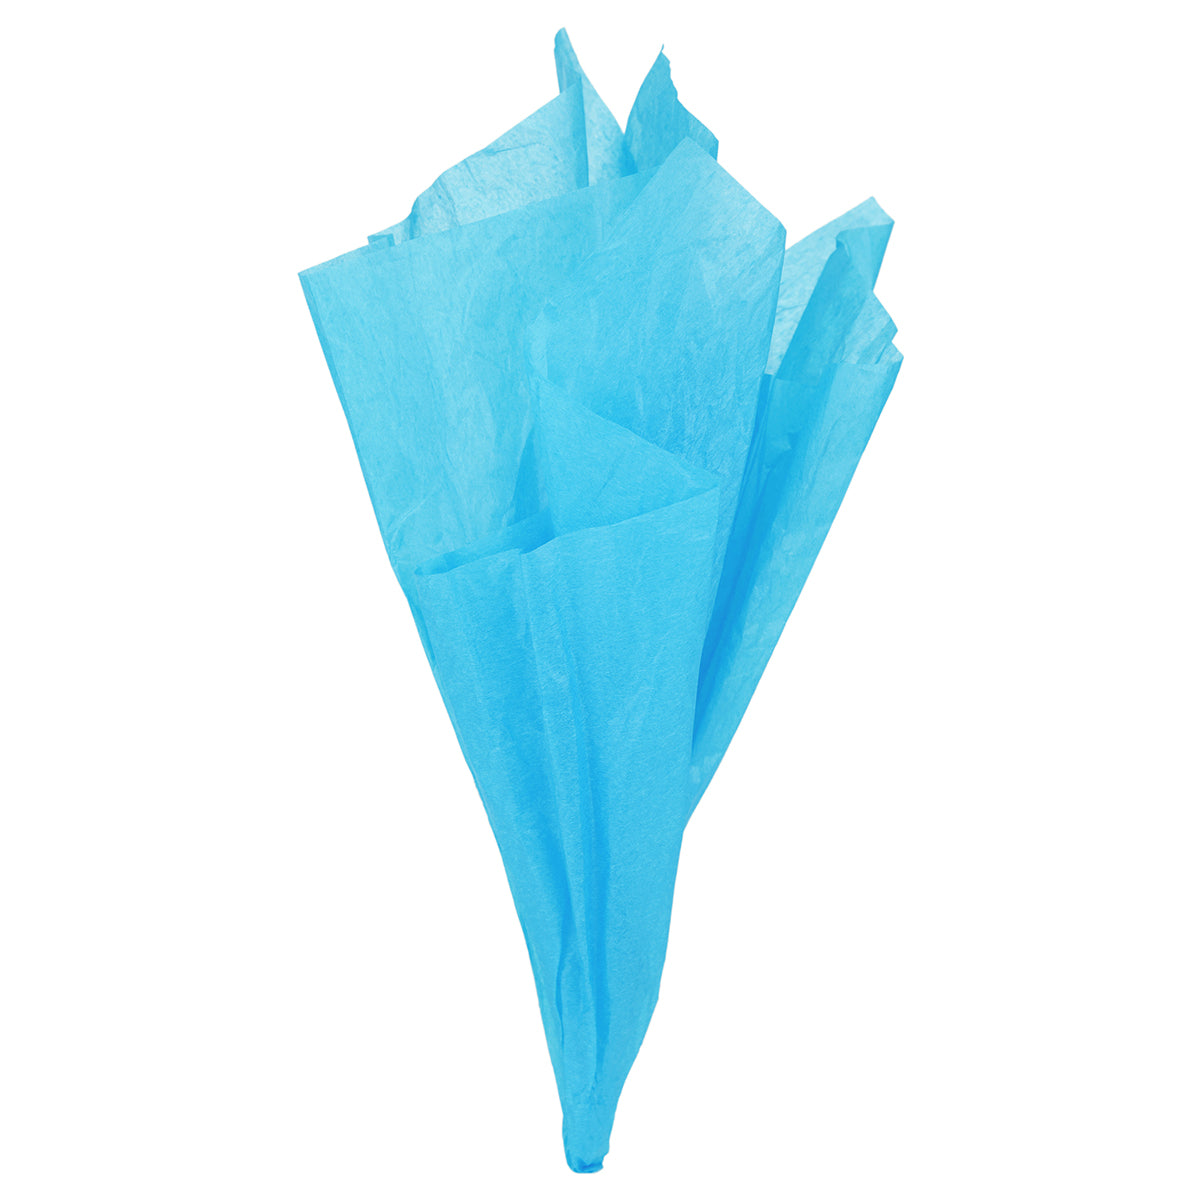 Displaying of a skyblue tissue paper in ice cream cone shape